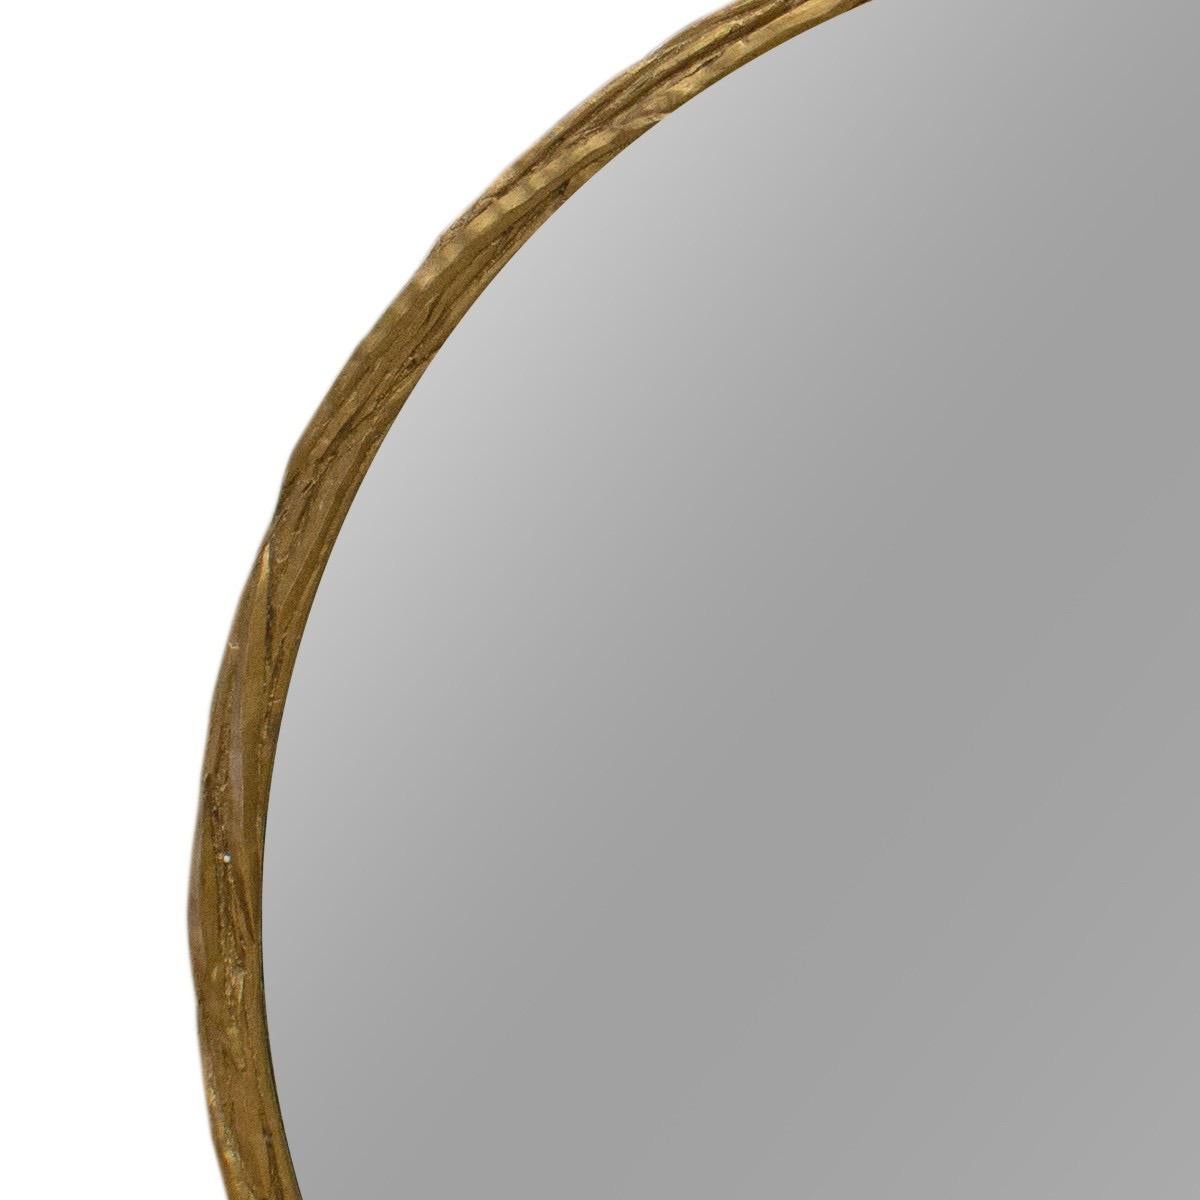 A Porta Romana Laurel round wall mirror in French brass finish by Donghia, circa 2010.

Dimensions: 43 inches W